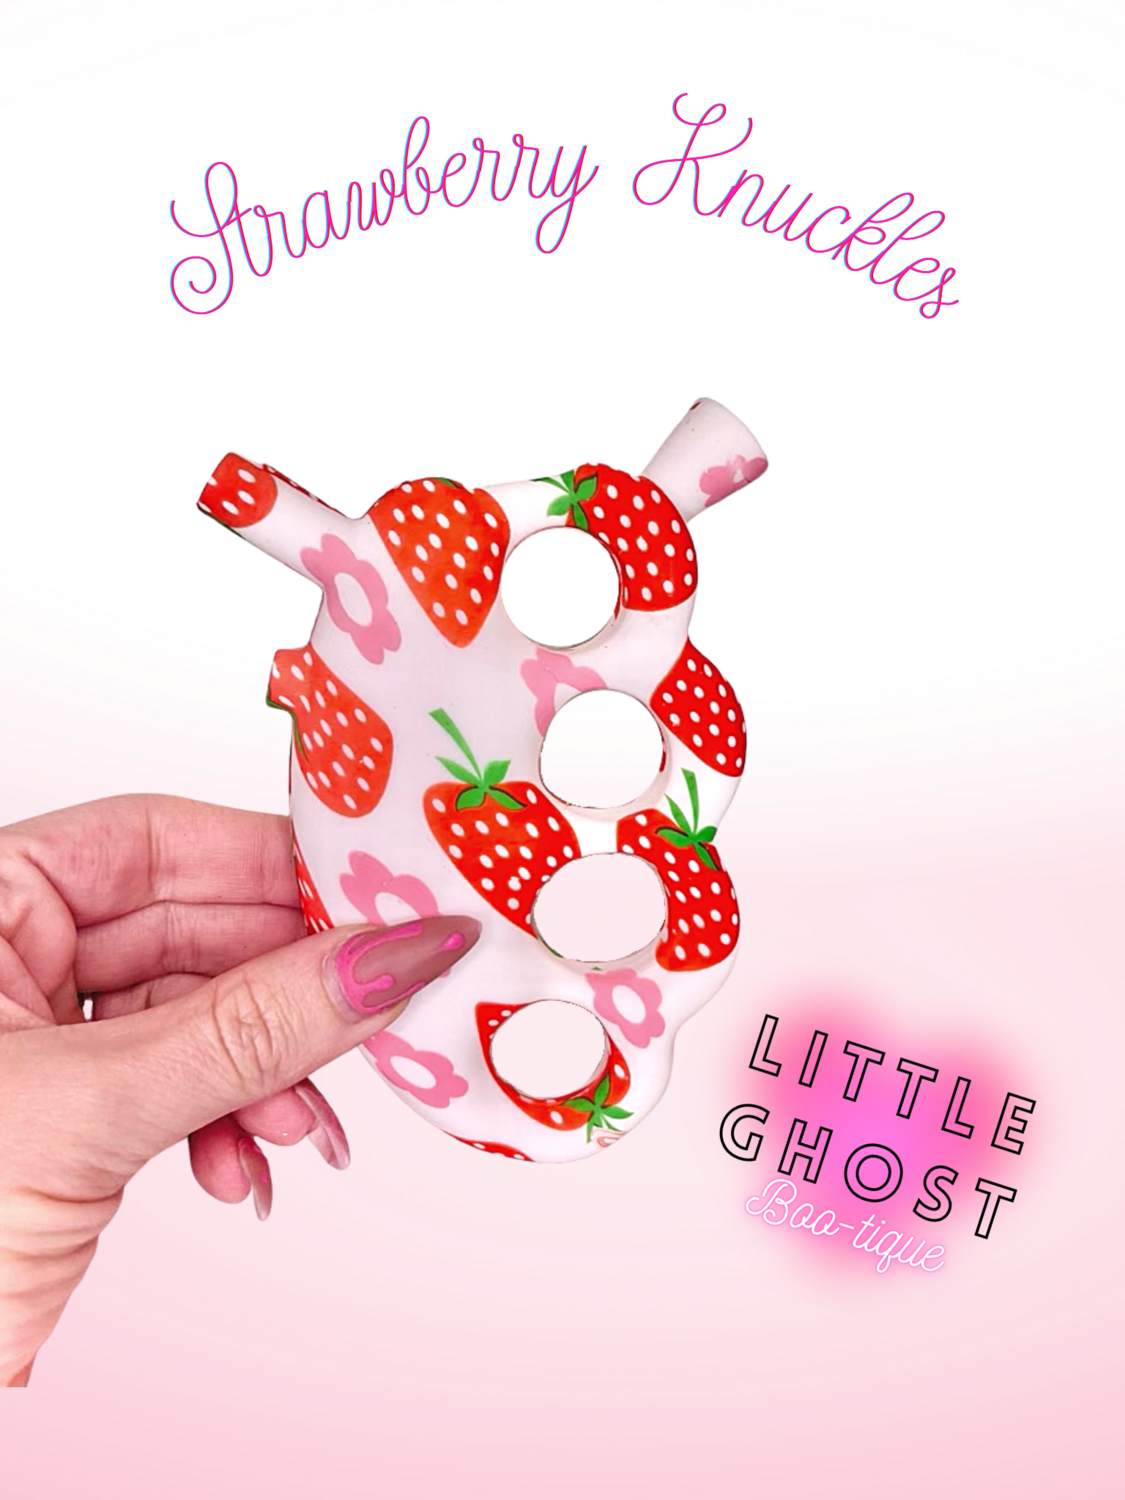 Strawberry Knuckle Pipe